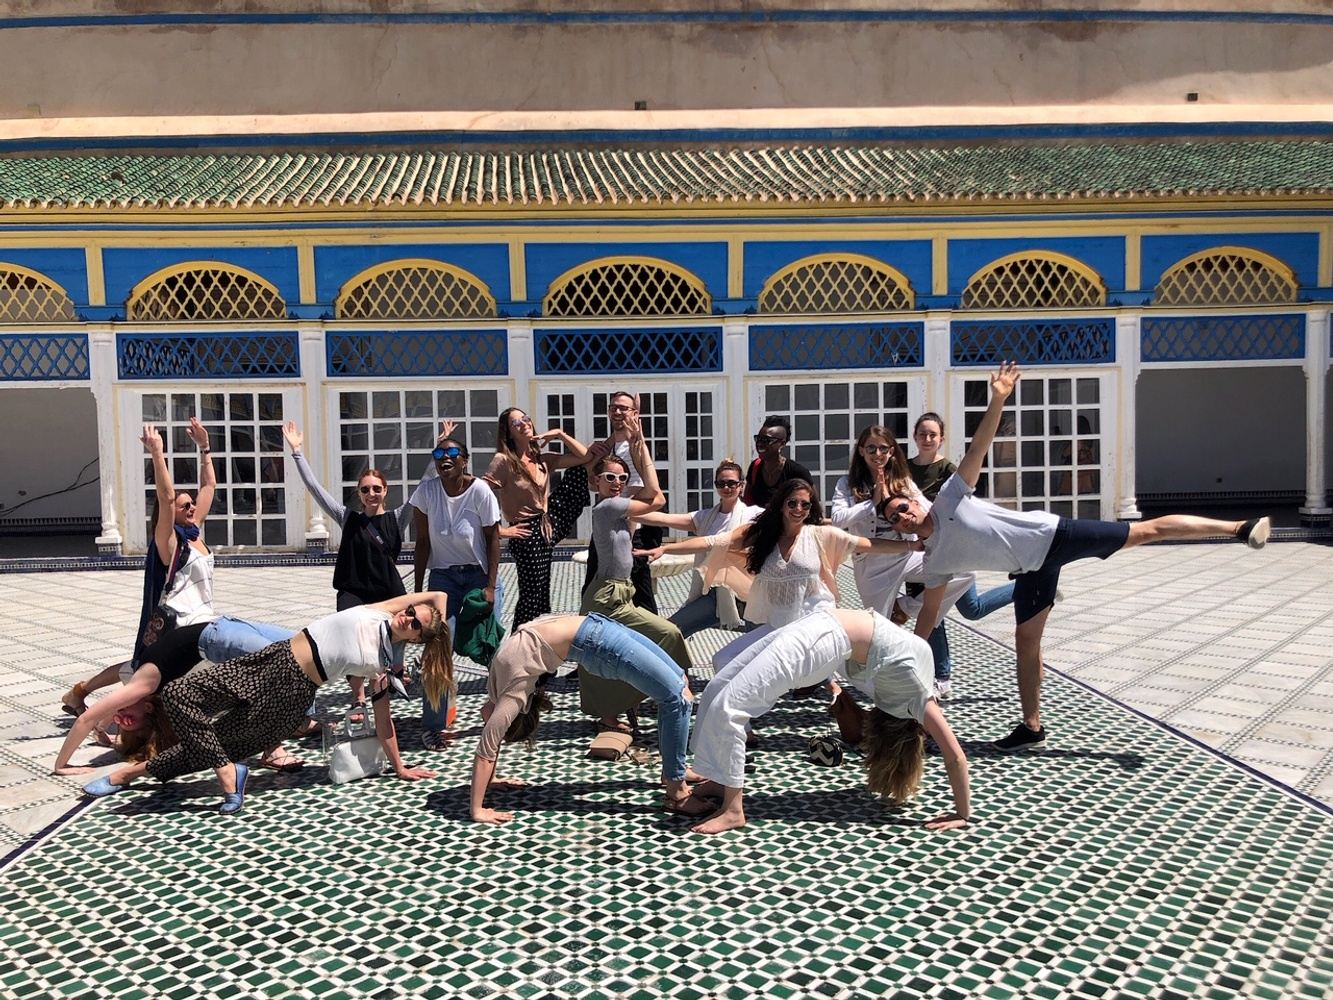 MOROCCO YOGA AND SOUND RETREAT AT PEACOCK PAVILLIONS